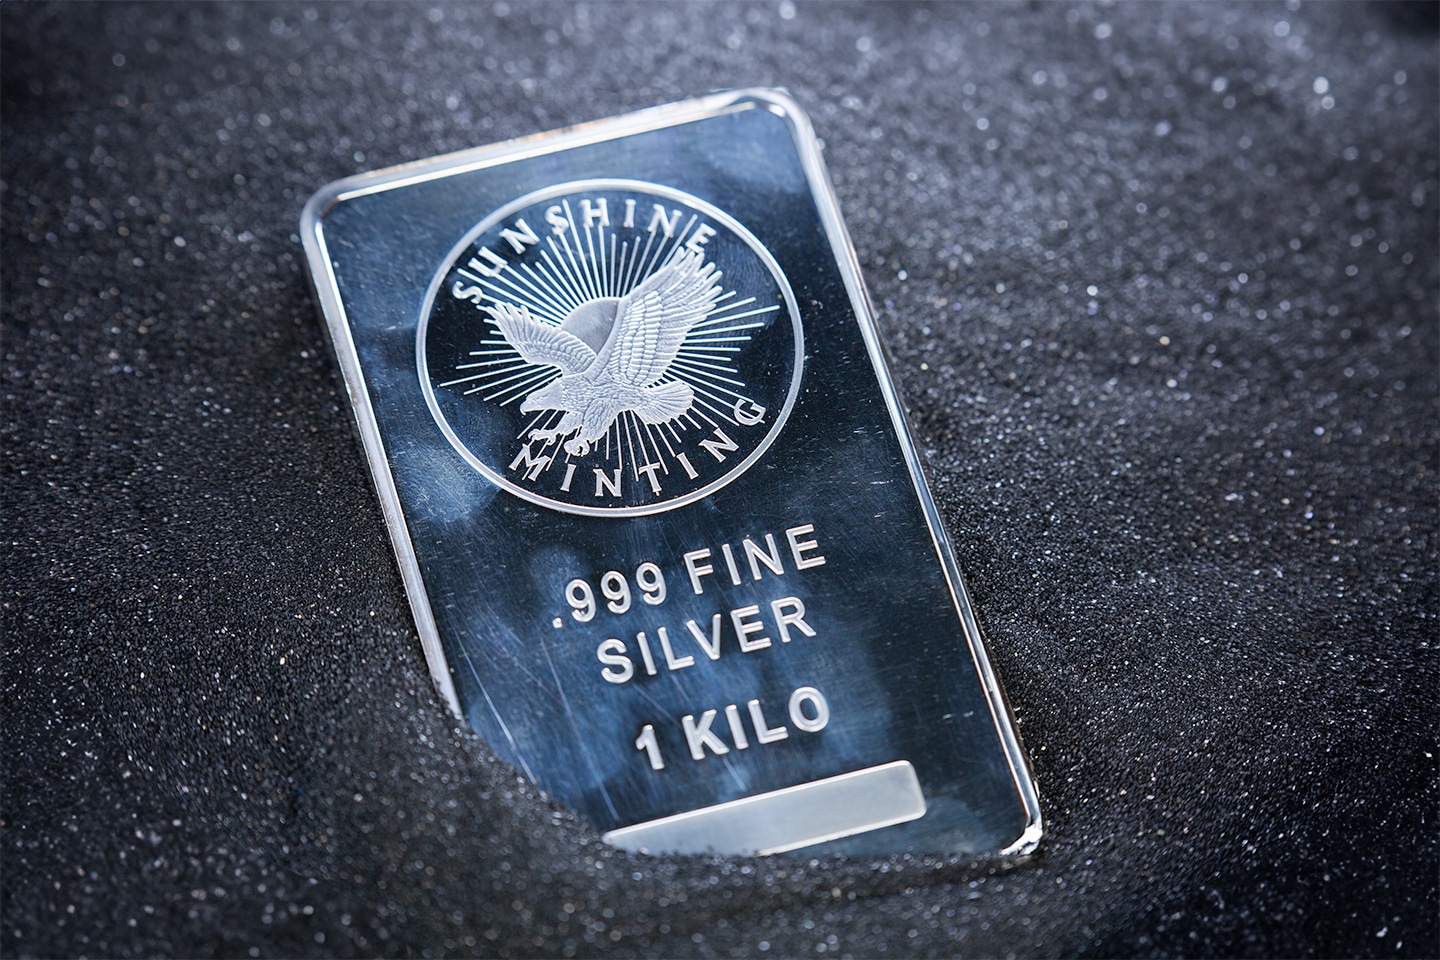 Exquisite 1 Kilo Silver Bar by Sunshine Minting